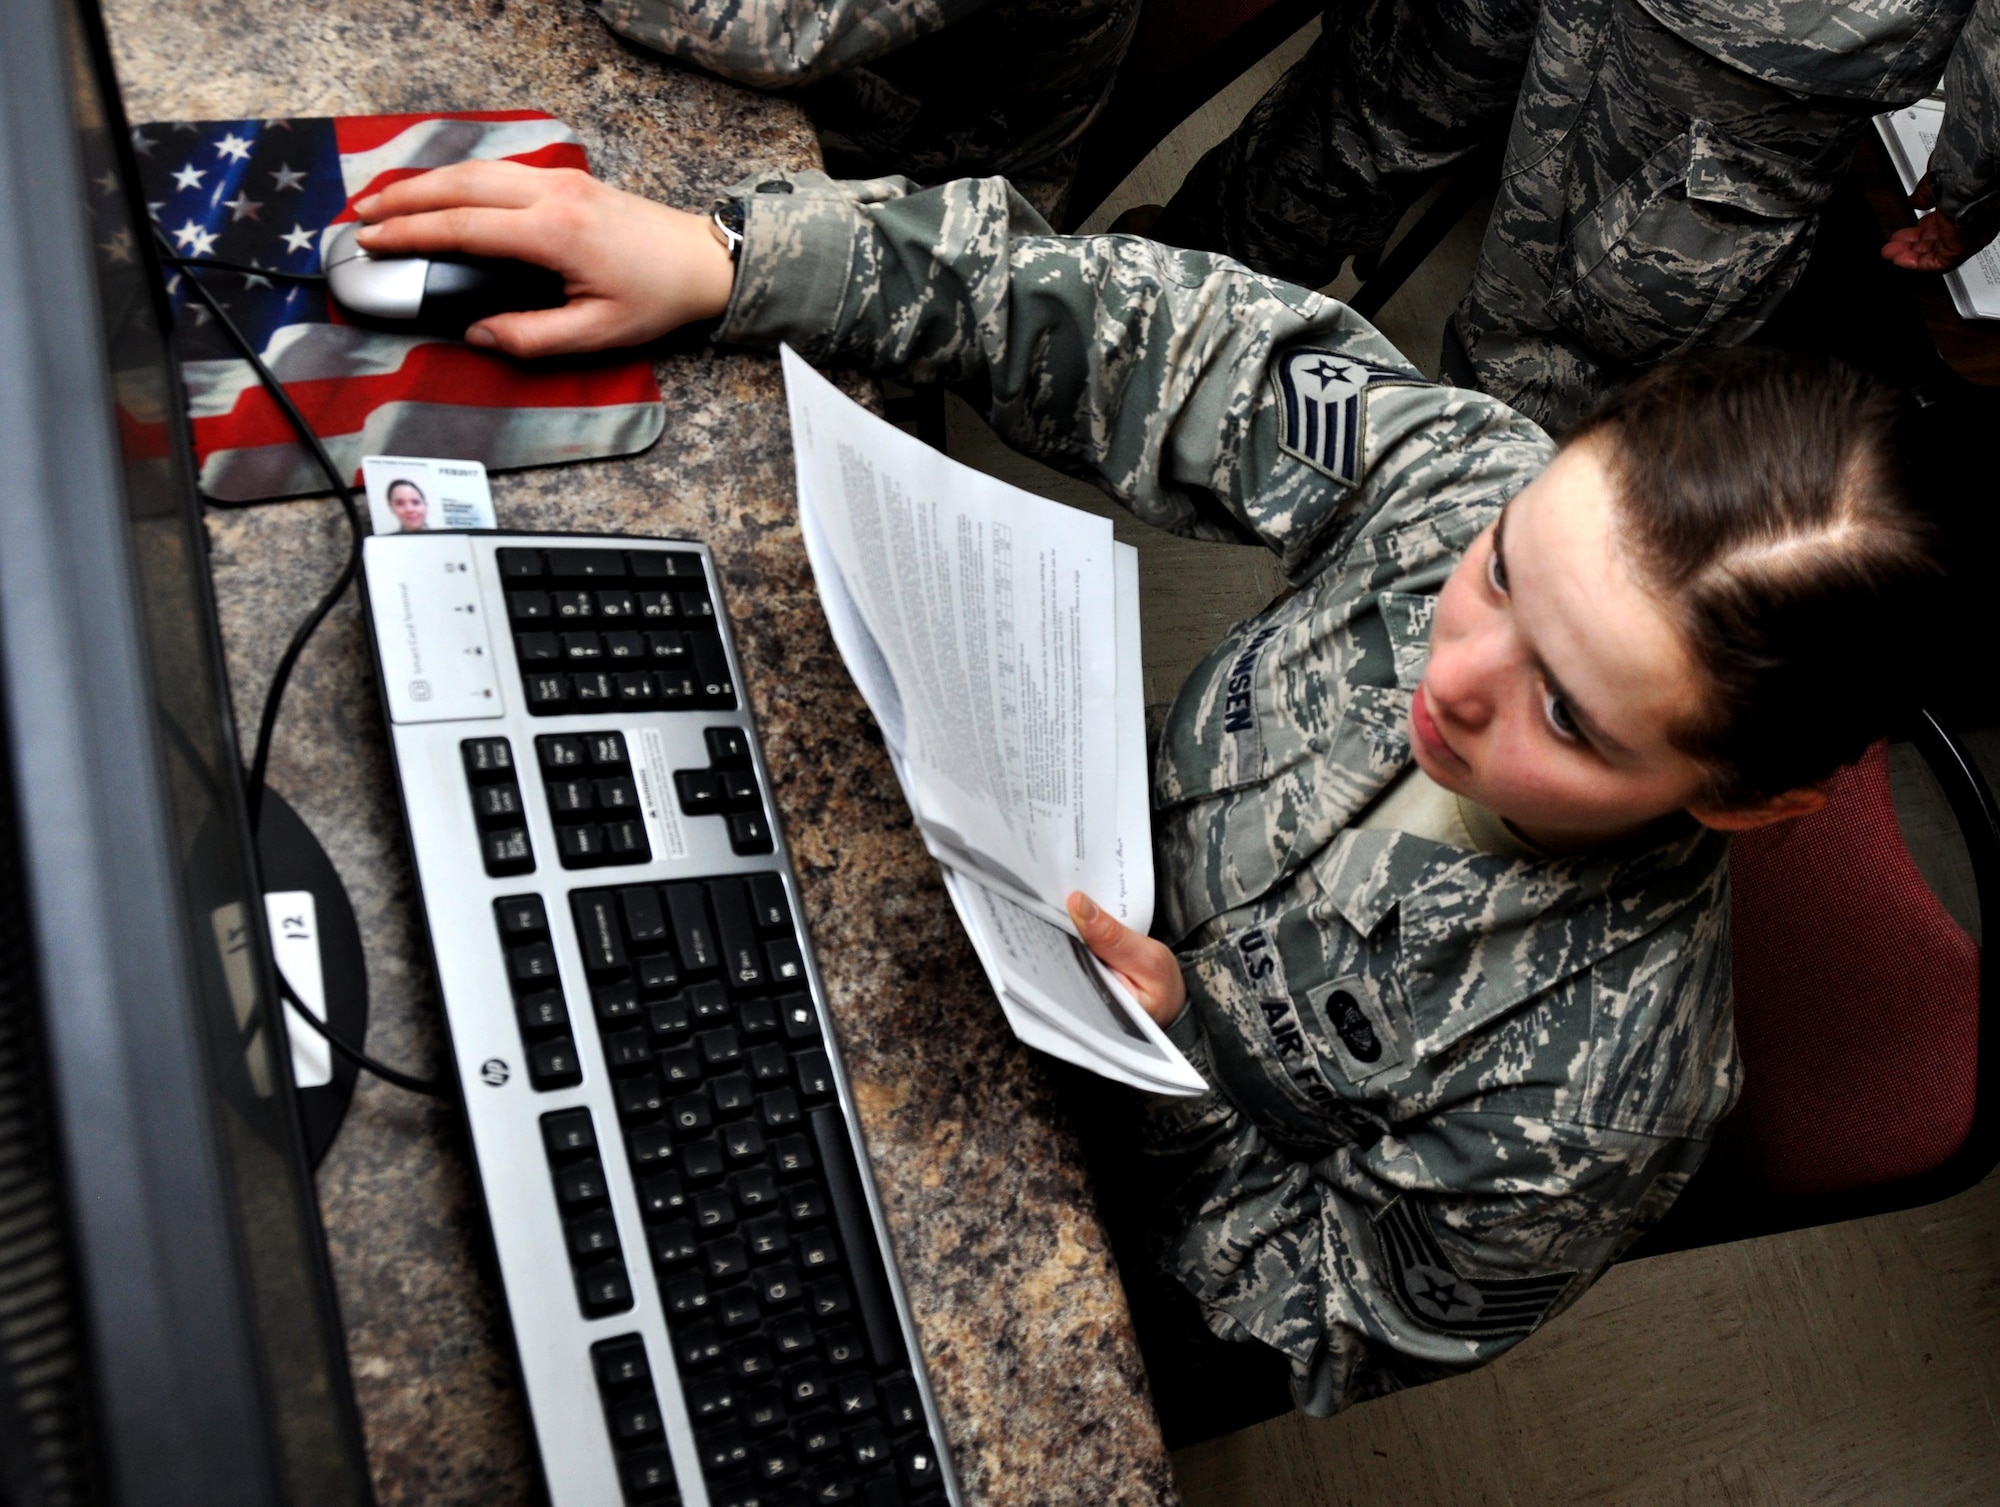 Staff Sgt. Kelsey Ansen, 911th Force Support Squadron, Pittsburgh, Pa., researches plans on how to build a bare base from scratch during a table top deployment scenario for Force Support Silver Flag at Dobbins Air Reserve Base, Ga., March 10, 2015. The challenge consisted of teams competing against each other in nine different events ranging from following a convoy, building tents, fixing Babington burners, cooking meals, planning lodging, planning a base from scratch, driving a forklift and a scavenger hunt. (U.S. Air Force photo/Senior Airman Daniel Phelps)